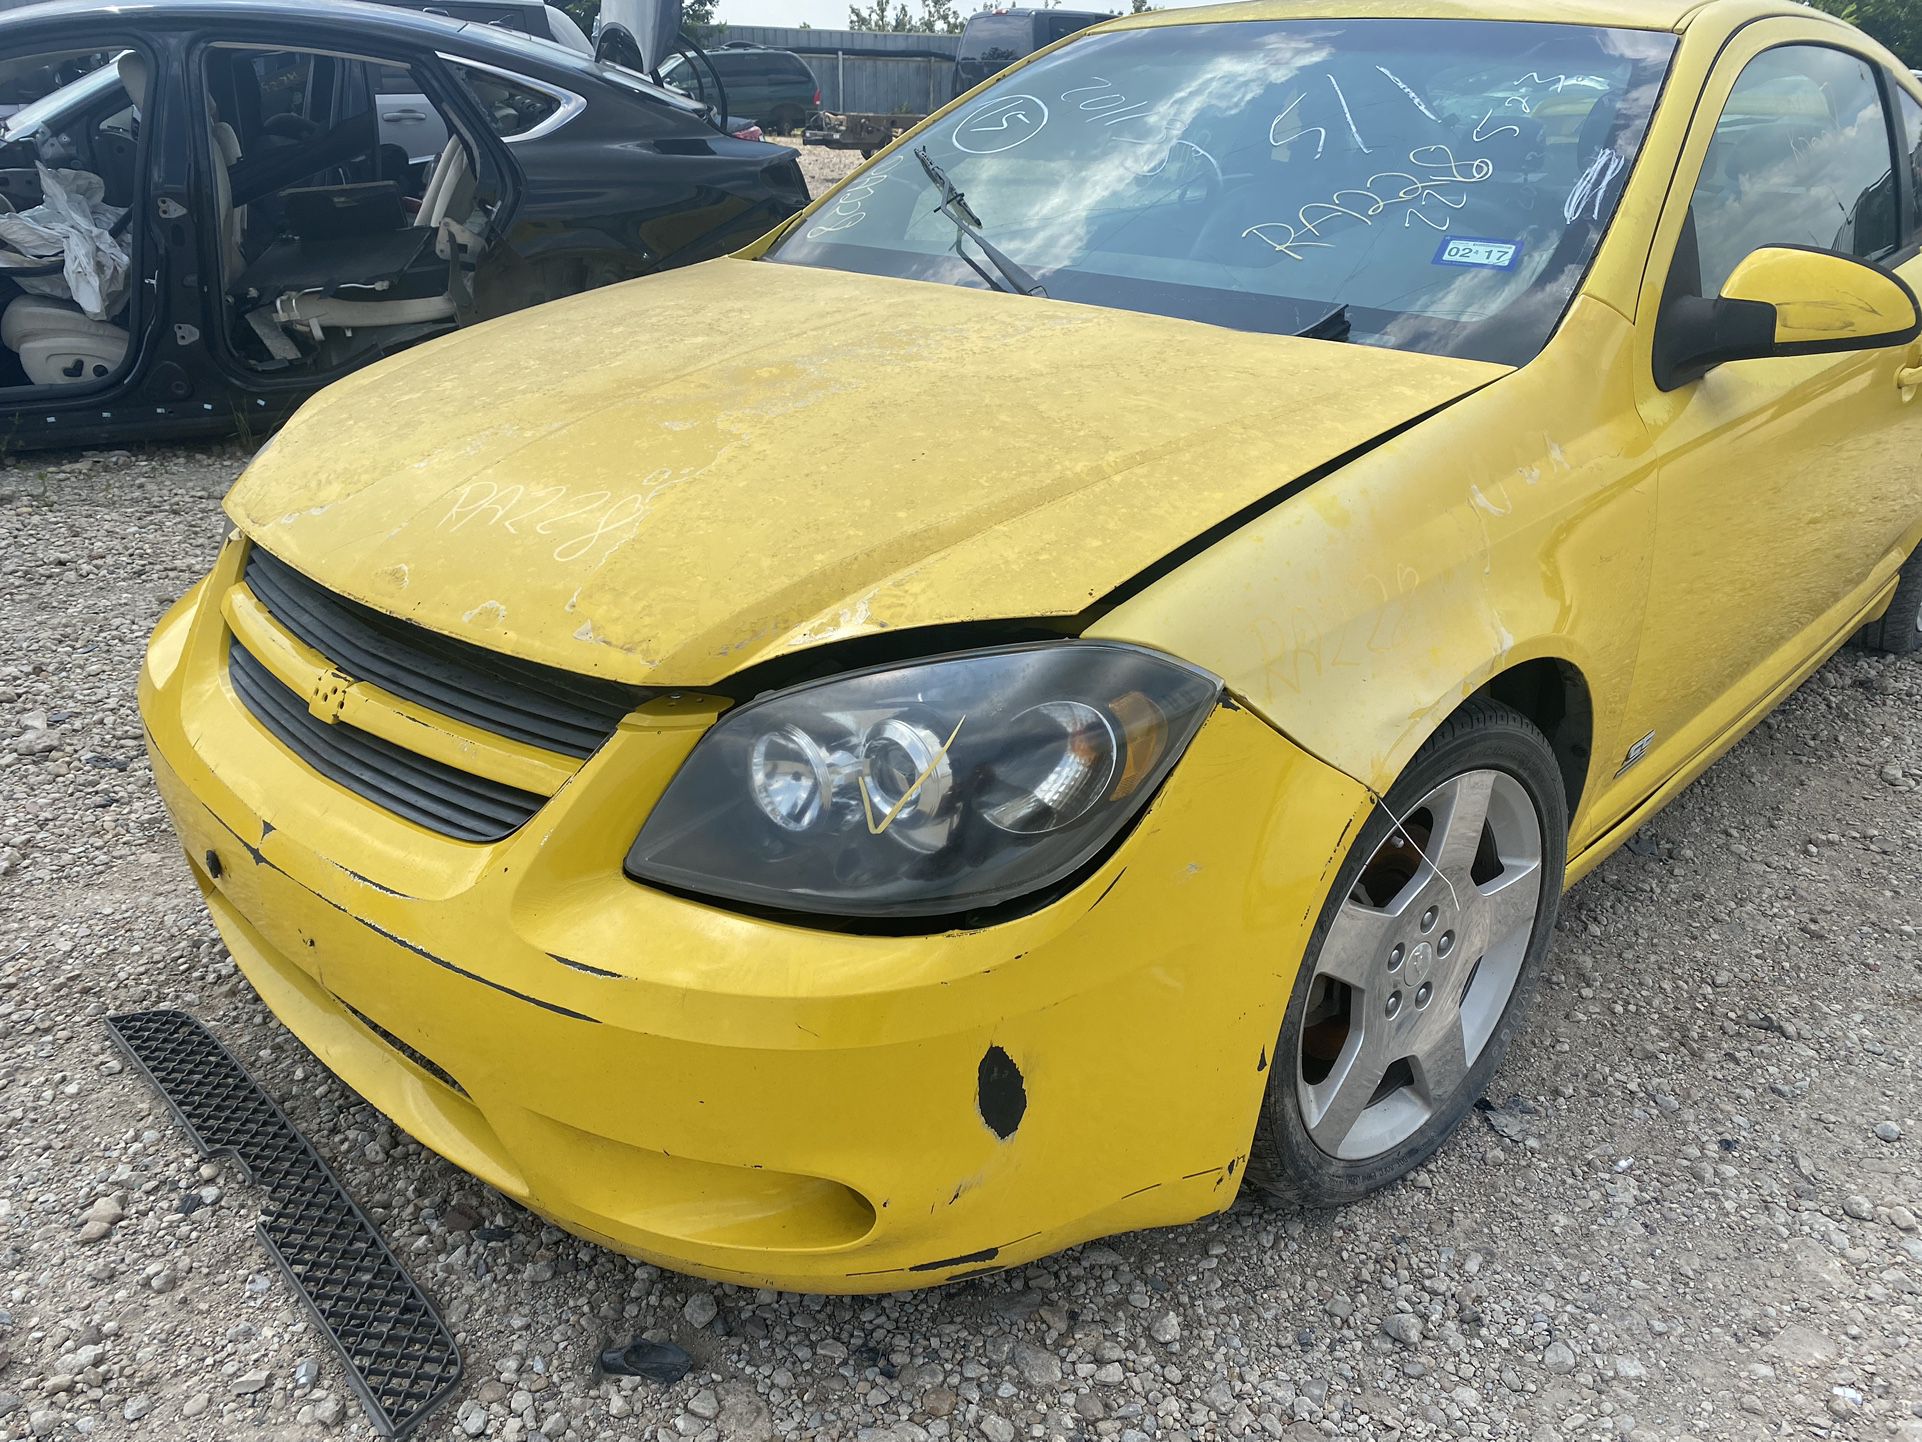 FOR PARTS ONLY 2006 Chevy cobalt SS SUPERCHARGED 2.0L manual / solo partes transmission estandard 